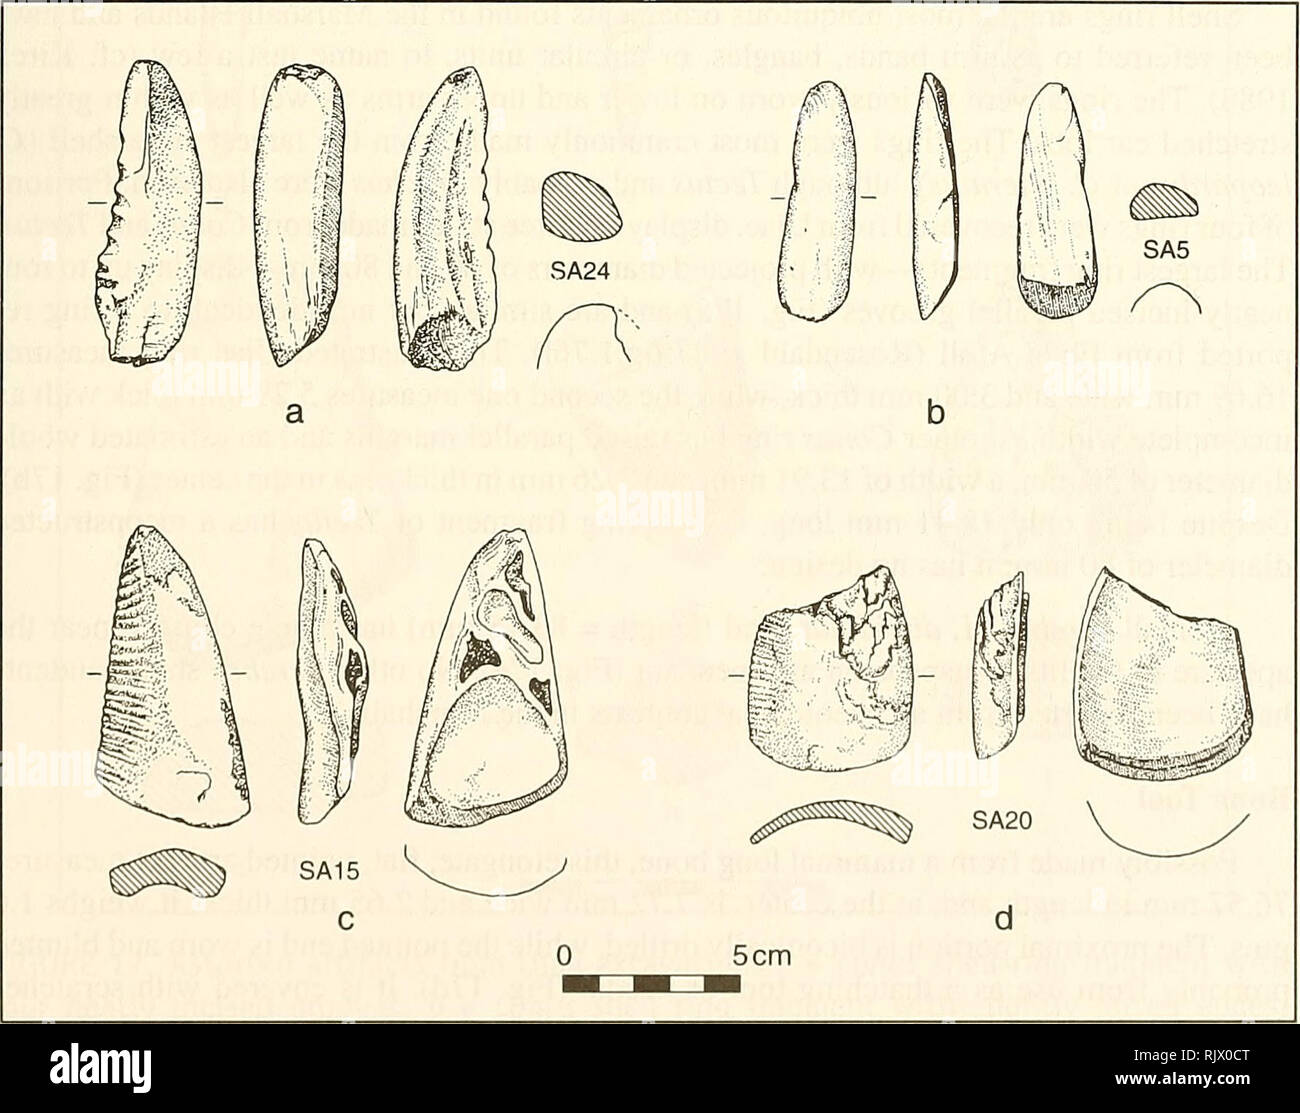 . Atoll research bulletin. Coral reefs and islands; Marine biology; Marine sciences. 27 publications or in the Aide Museum (National Museum of the Marshall Islands) collec- tions. Inspection of whole and fragmentary reference shells shows clearly that the whorls of Cassis cornuta are much thinner with an uneven surface. Five of seven (71%) specimens were made from the whorl of Cyraecassis rufa shells at least 138 mm long (Fig. 16c and d). Grinding is minimal on the back and sides and is not required on the front surface. All specimens are concave-convex in cross-section with curved to slightly Stock Photo